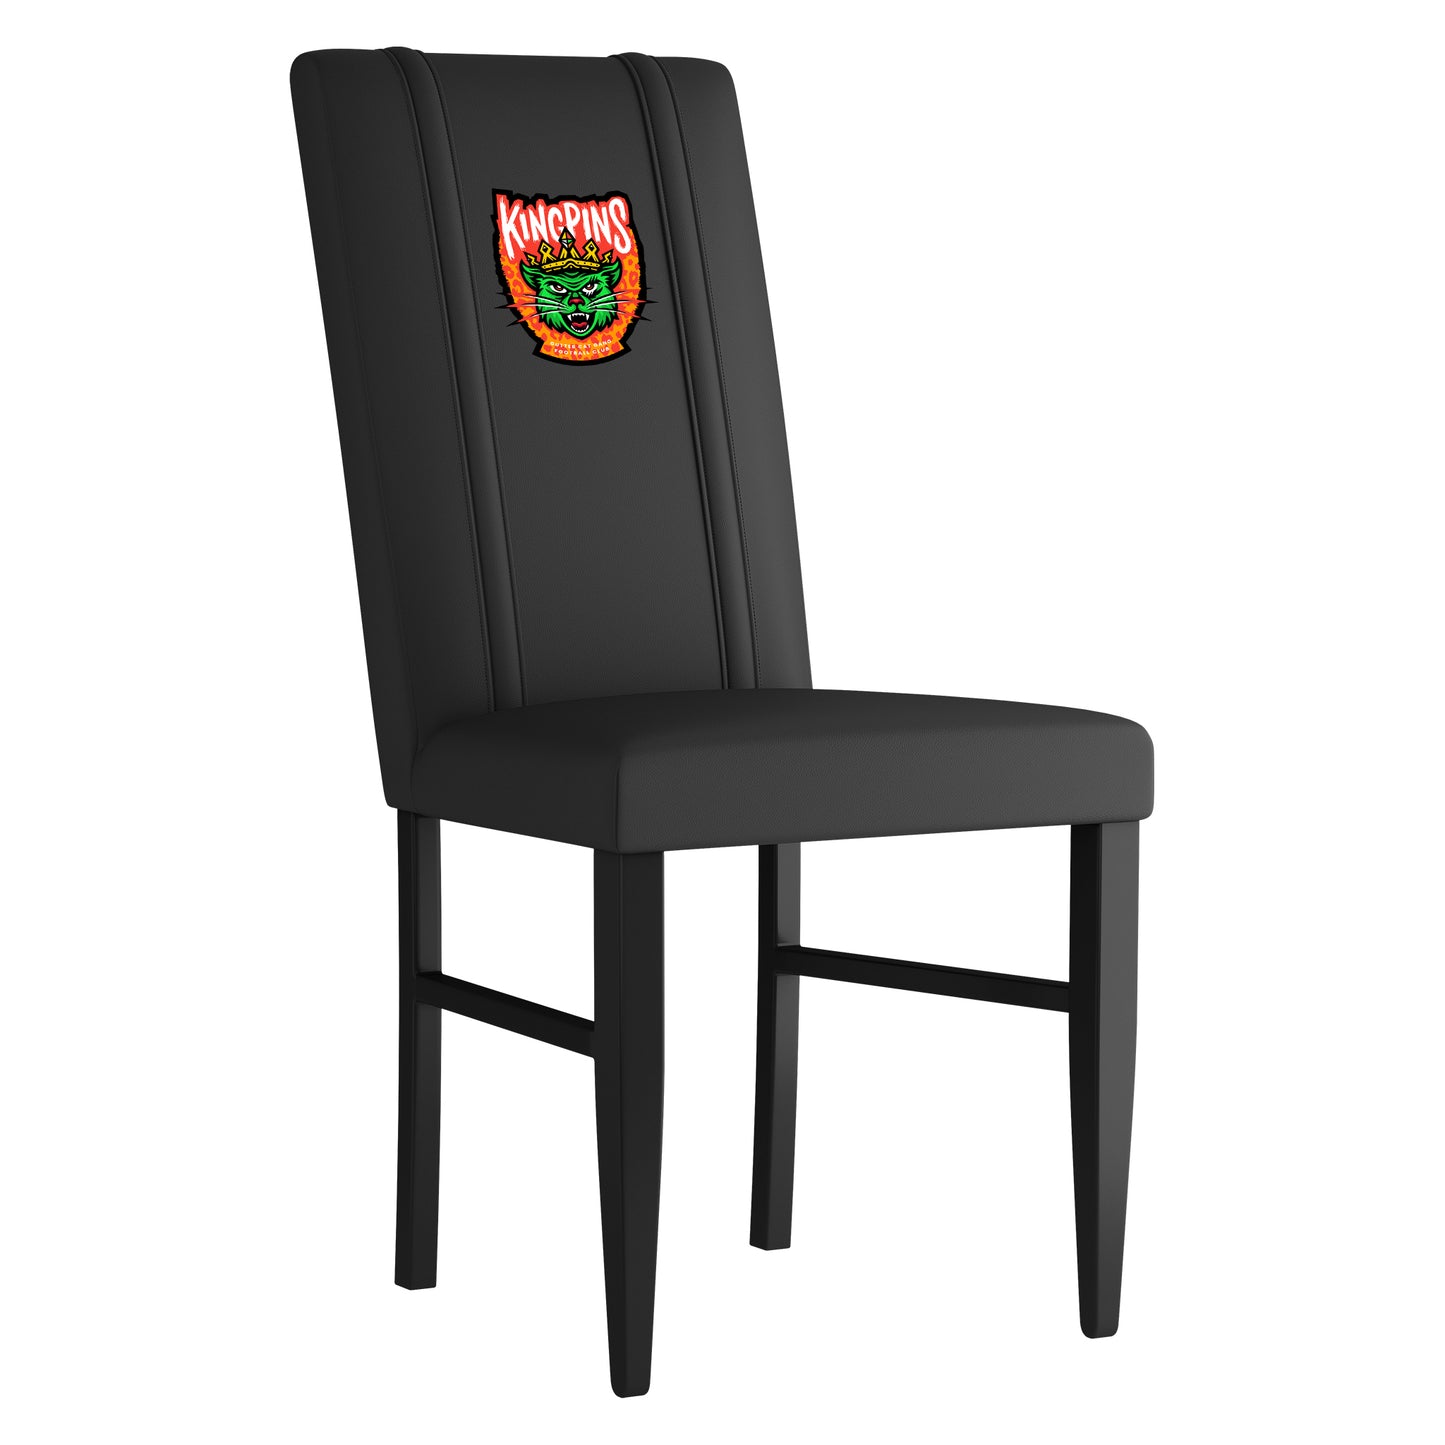 Side Chair 2000 with Kingpins Primary Logo Set of 2